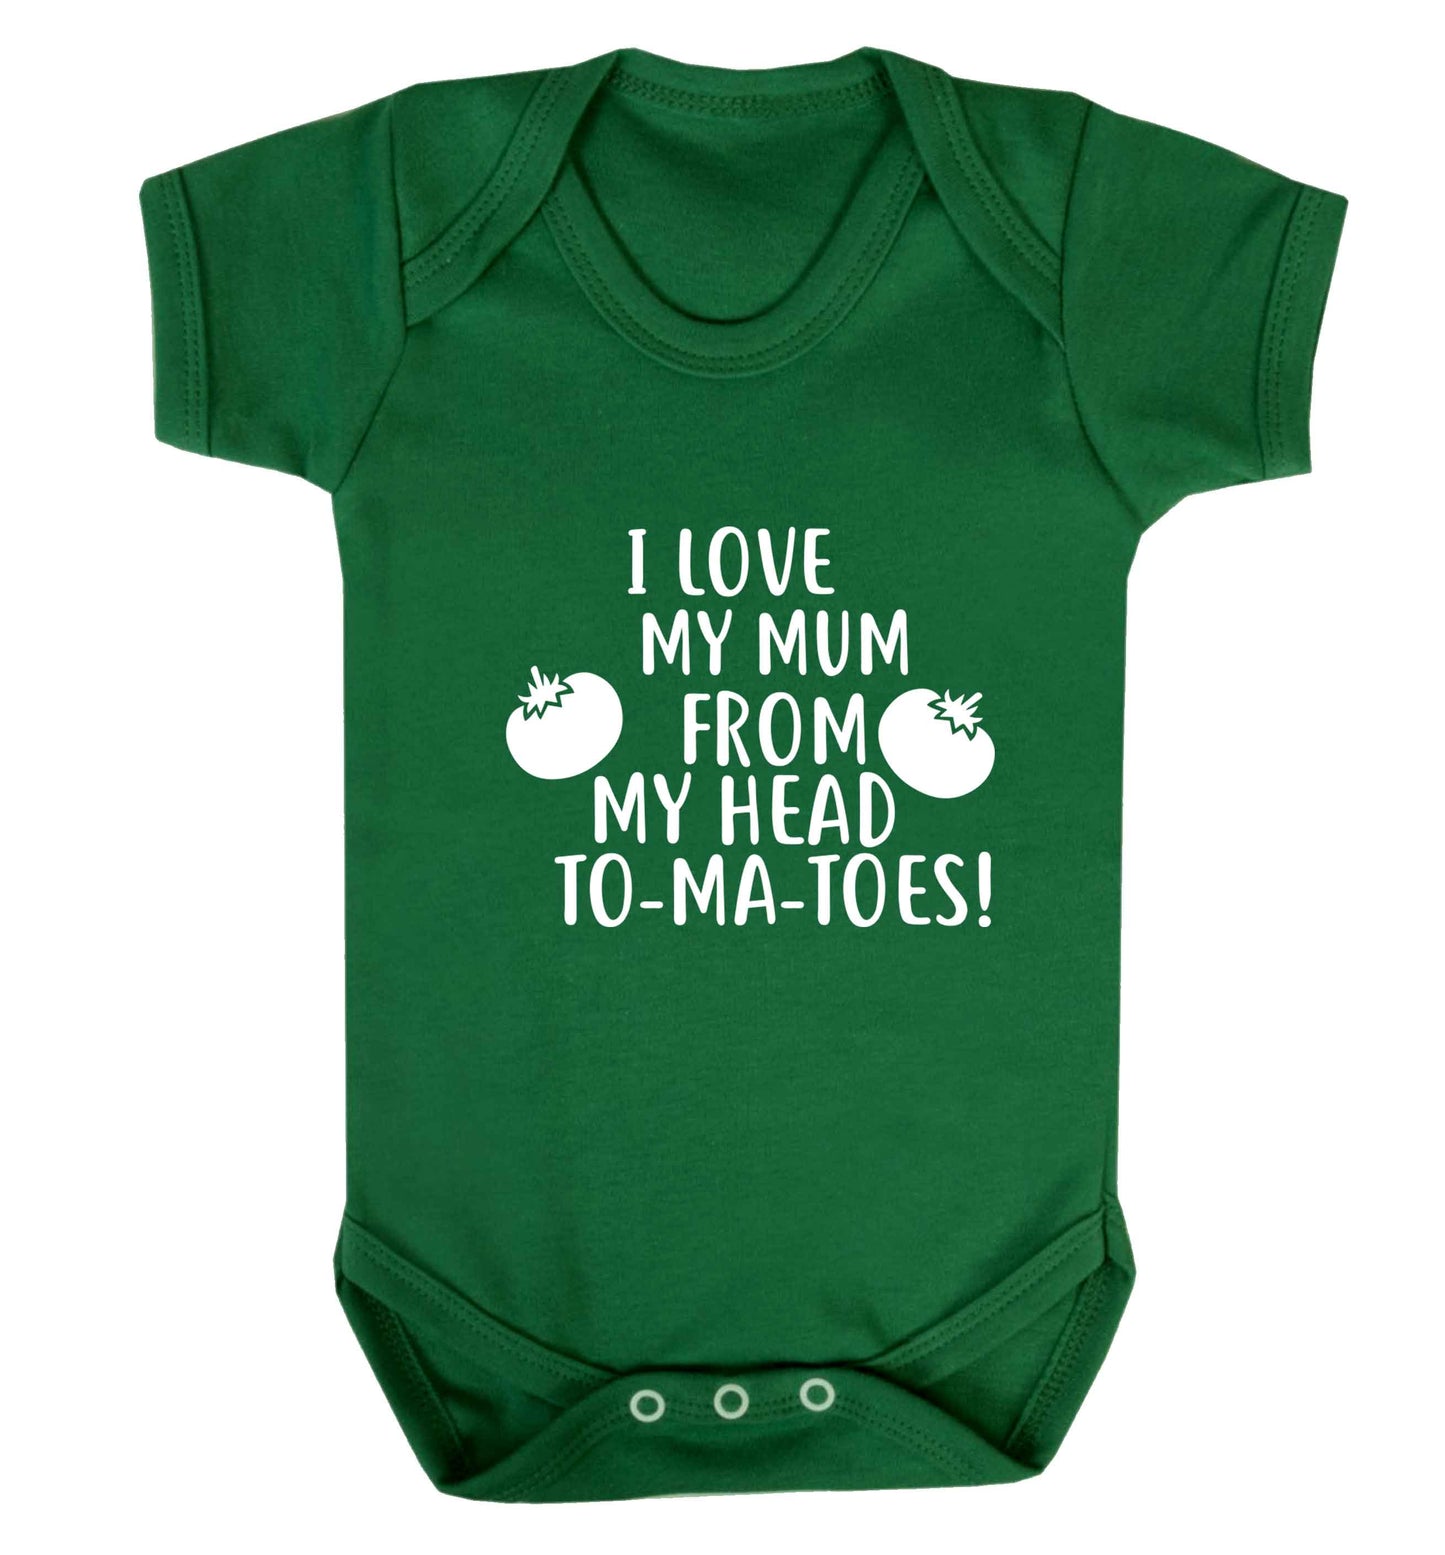 I love my mum from my head to-my-toes! baby vest green 18-24 months